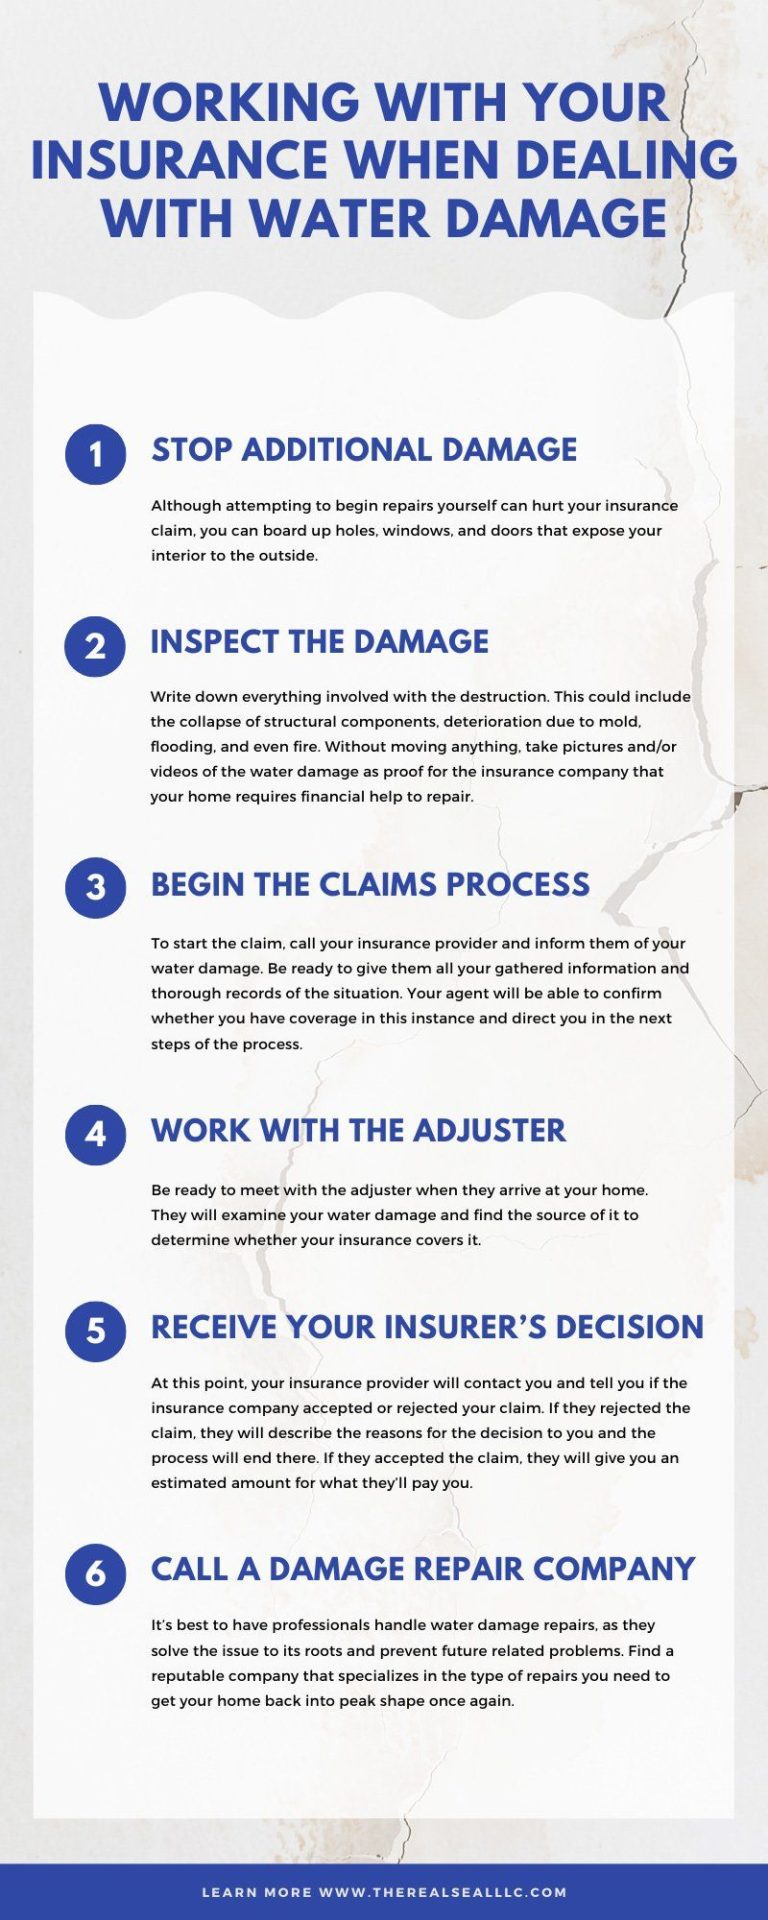 Working with Your Insurance When Dealing with Water Damage